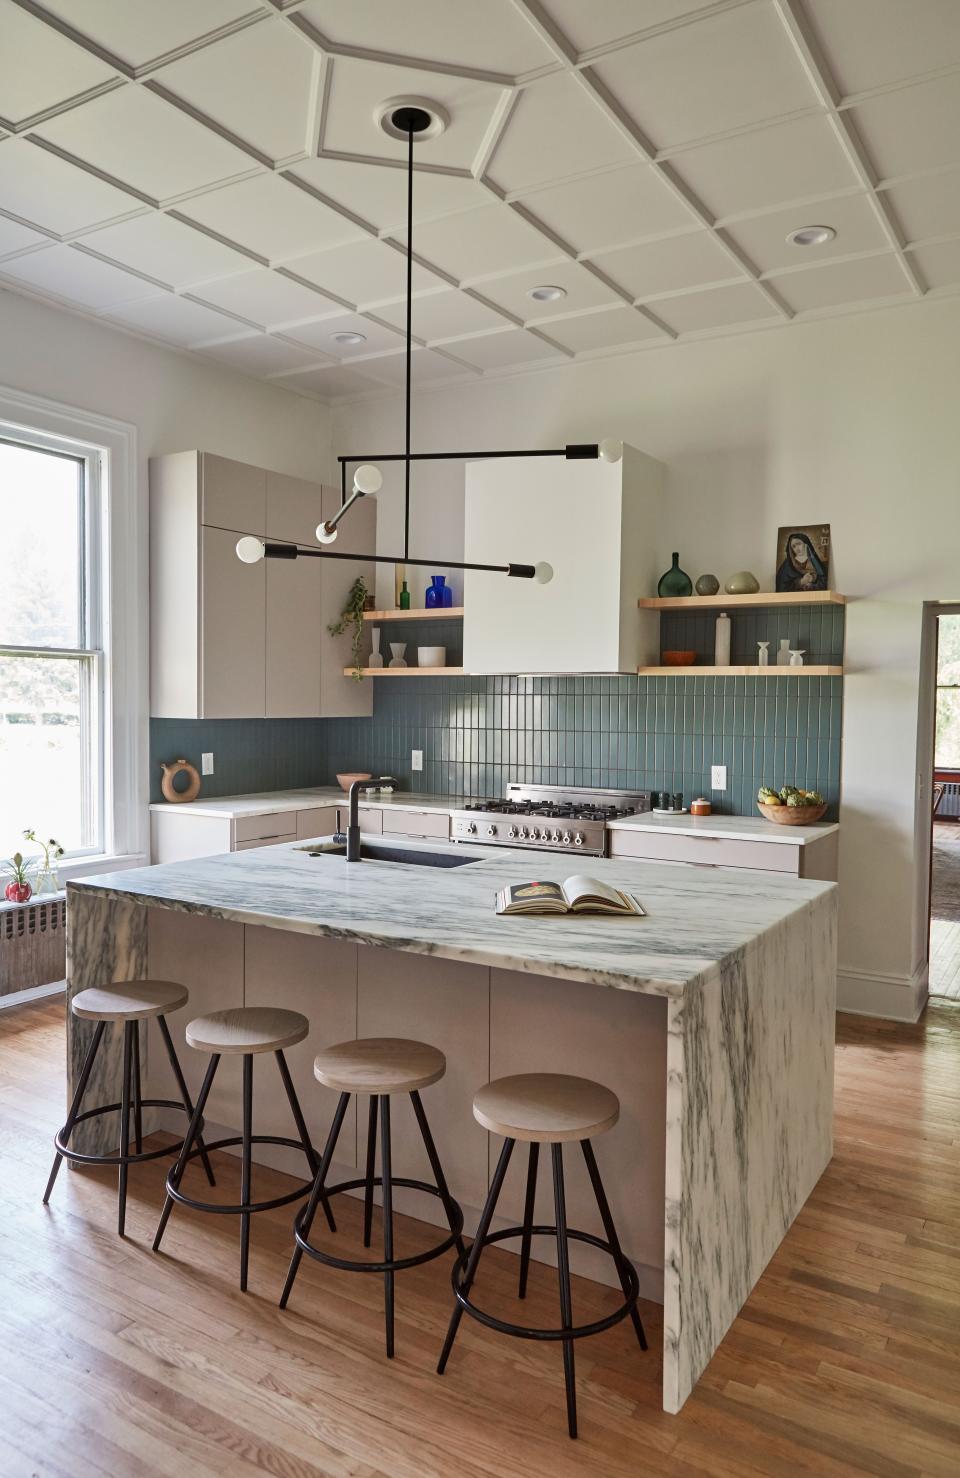 “We did the same marble throughout,” says Nick, referring to the Vermont Danby marble countertops and island. “While we did want to modernize, I felt like a contrasting island wouldn’t be one hundred percent true to the historic nature of the house.”